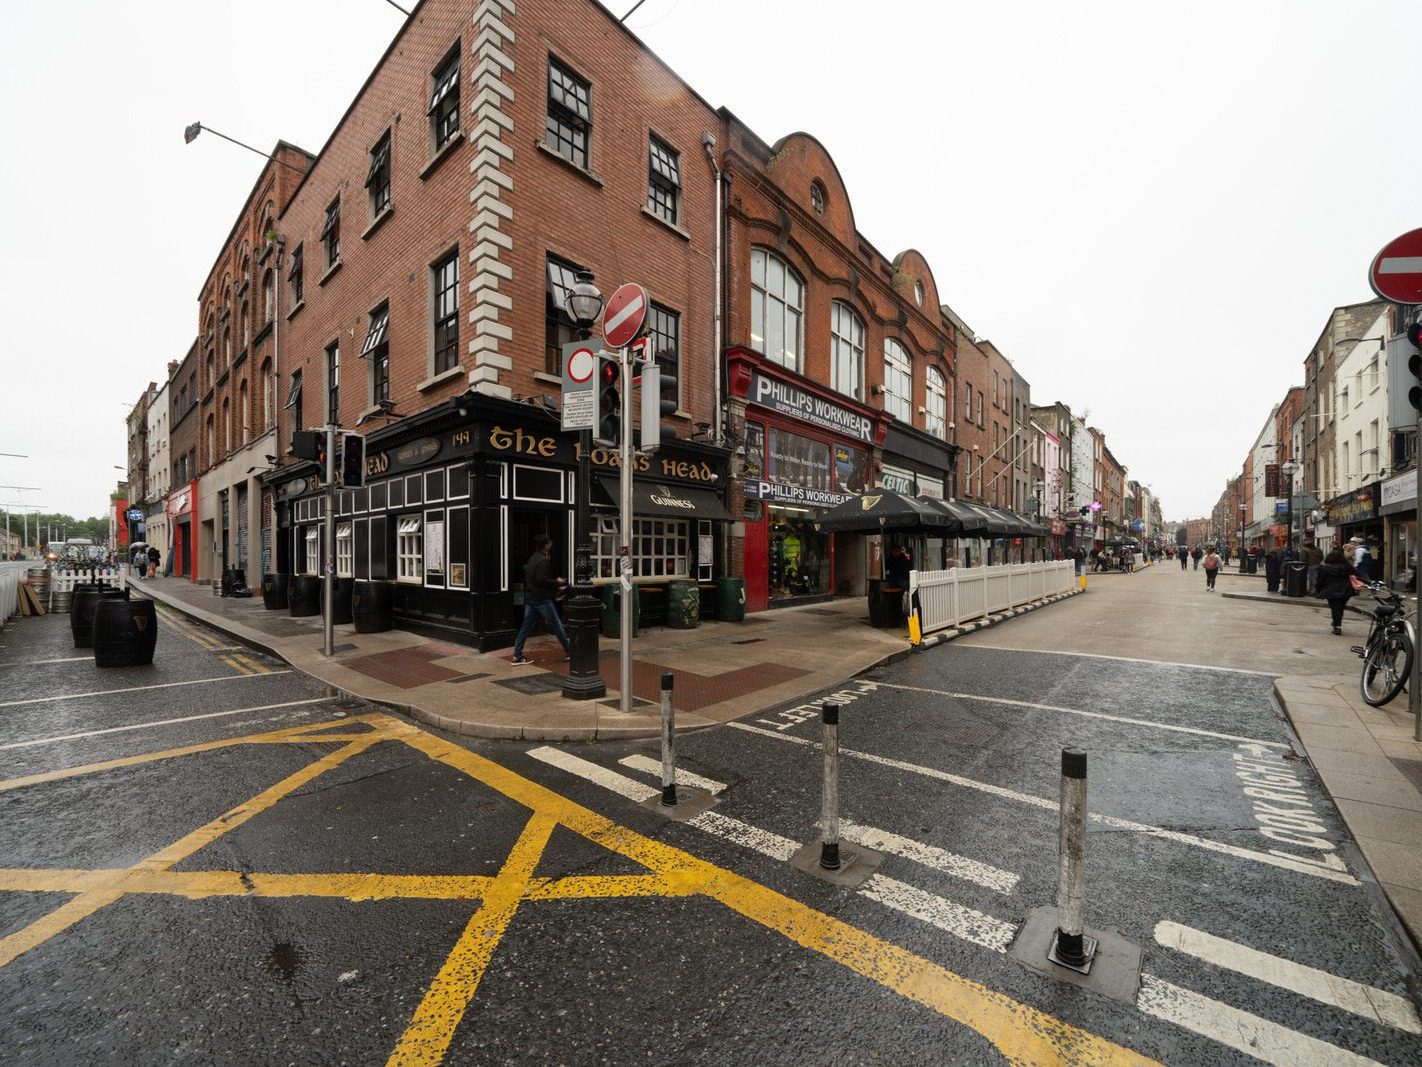 CAPEL STREET ON A DULL WET DAY [INTERIM CAPEL STREET IMPROVEMENT WORKS ARE NOW ONGOING] 022